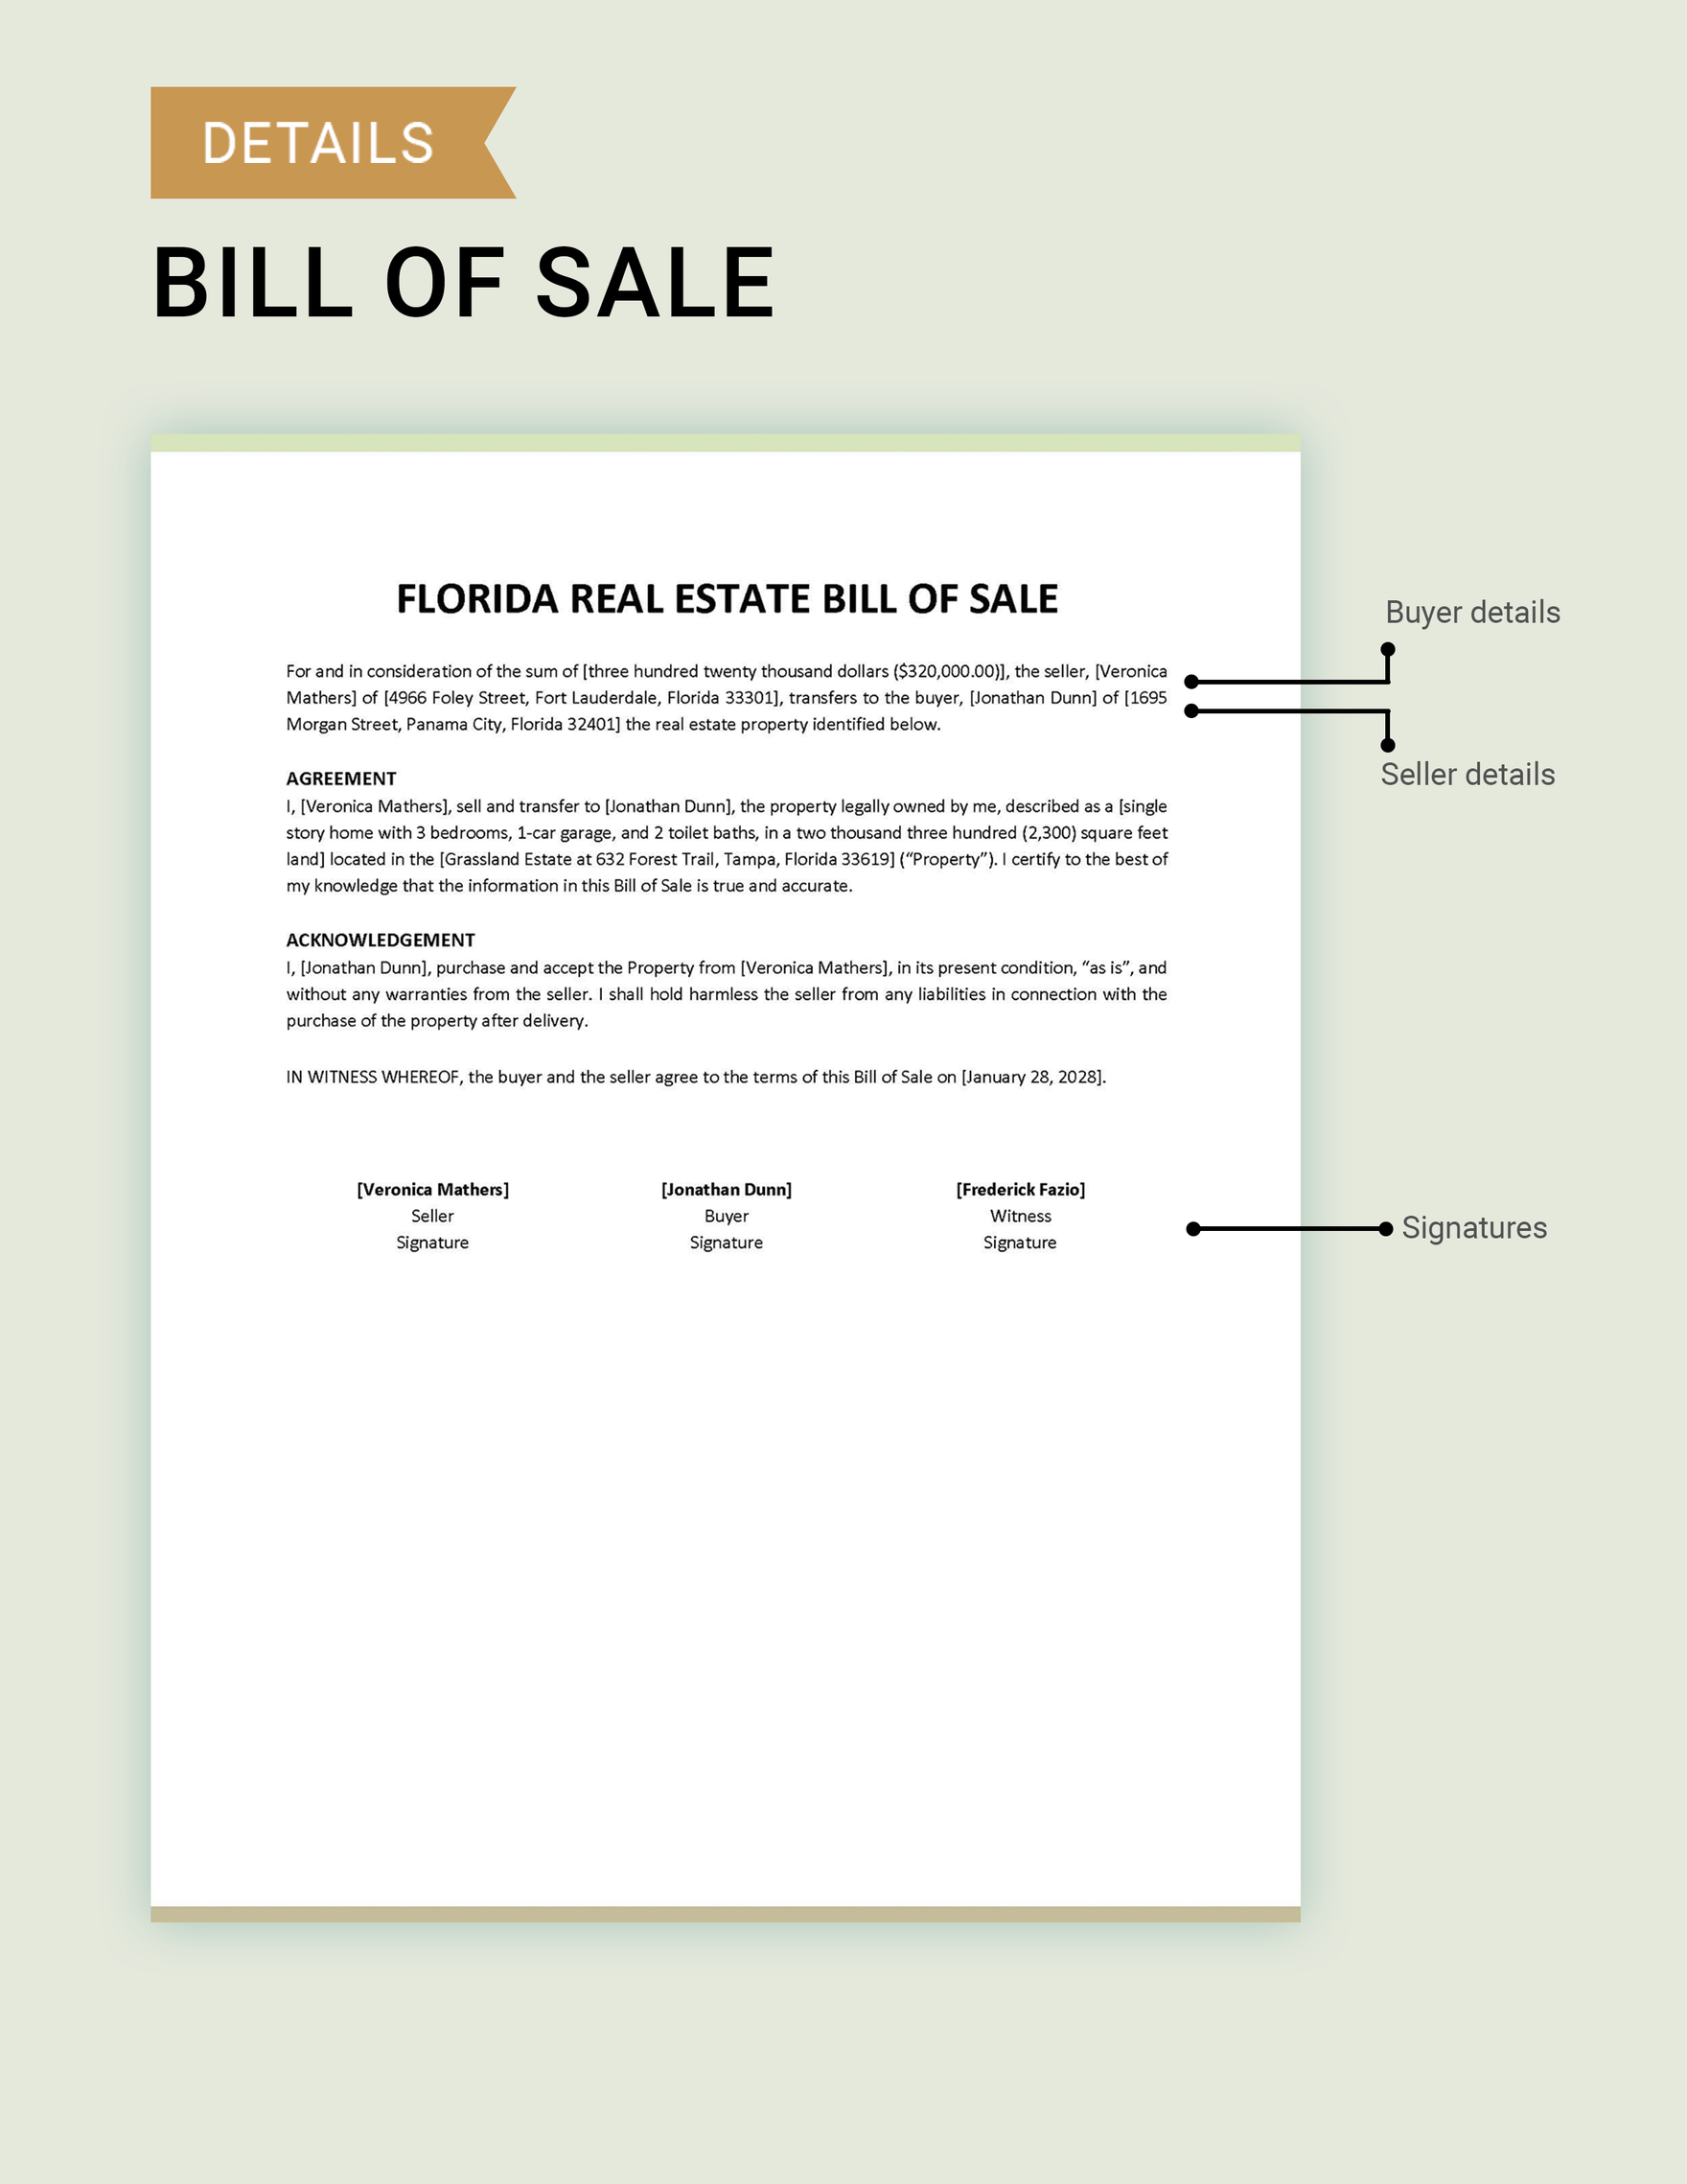 Florida Real Estate Bill of Sale Template